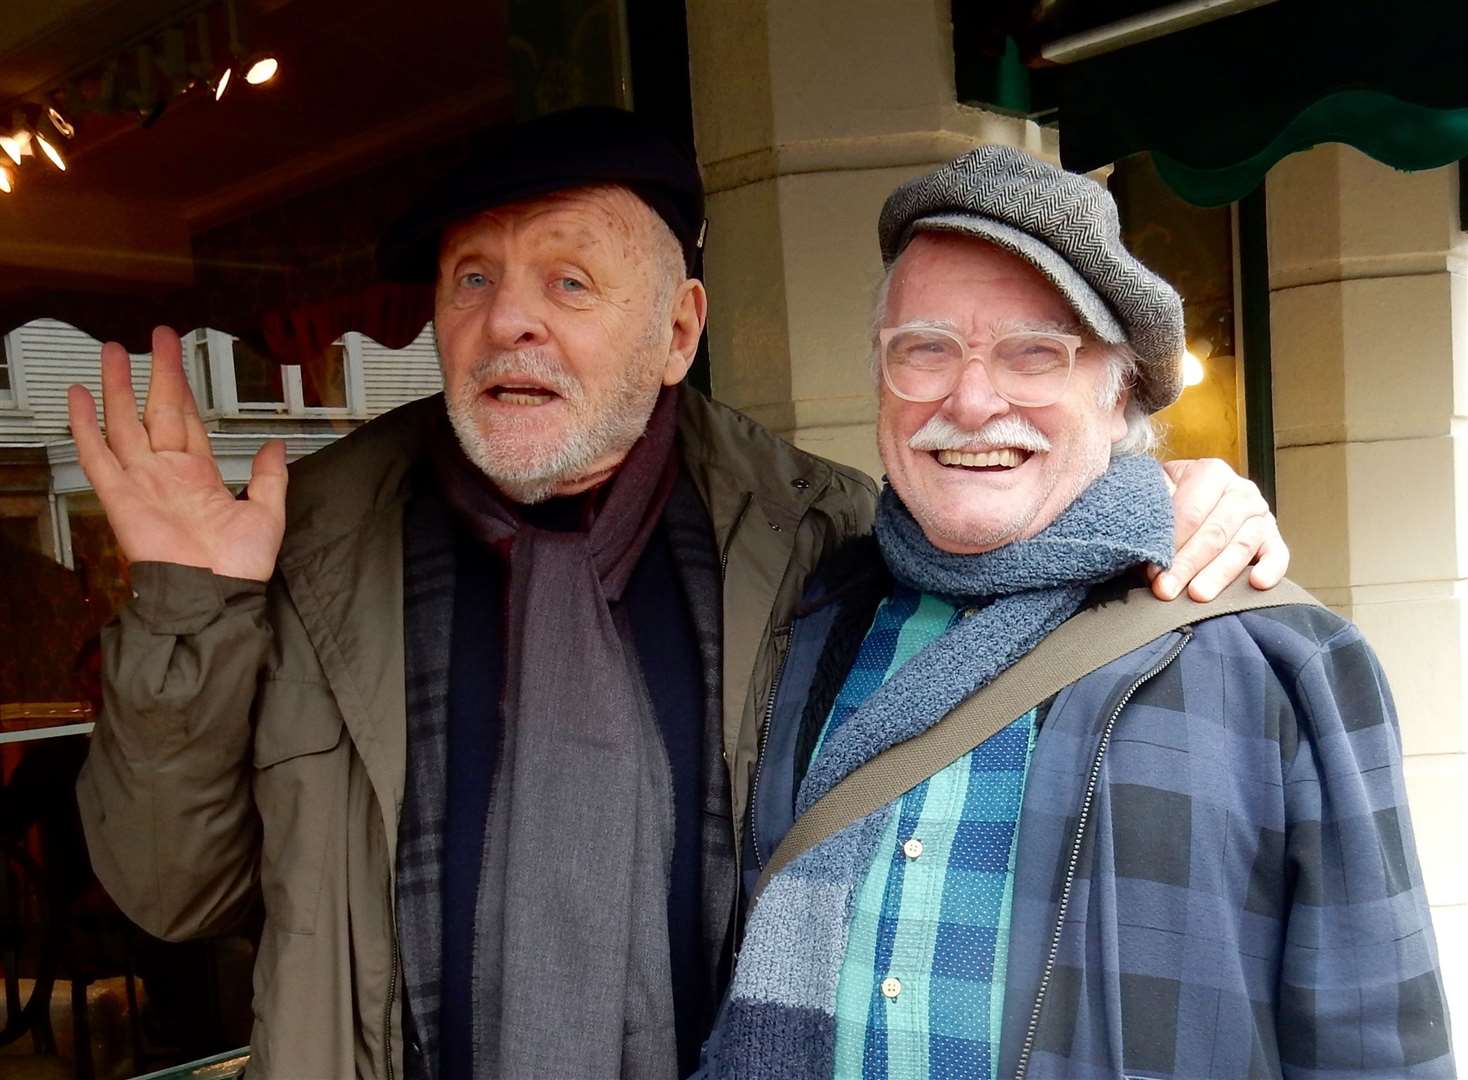 Anthony Hopkins' approachable personality proved a hit with a stunned passer-by